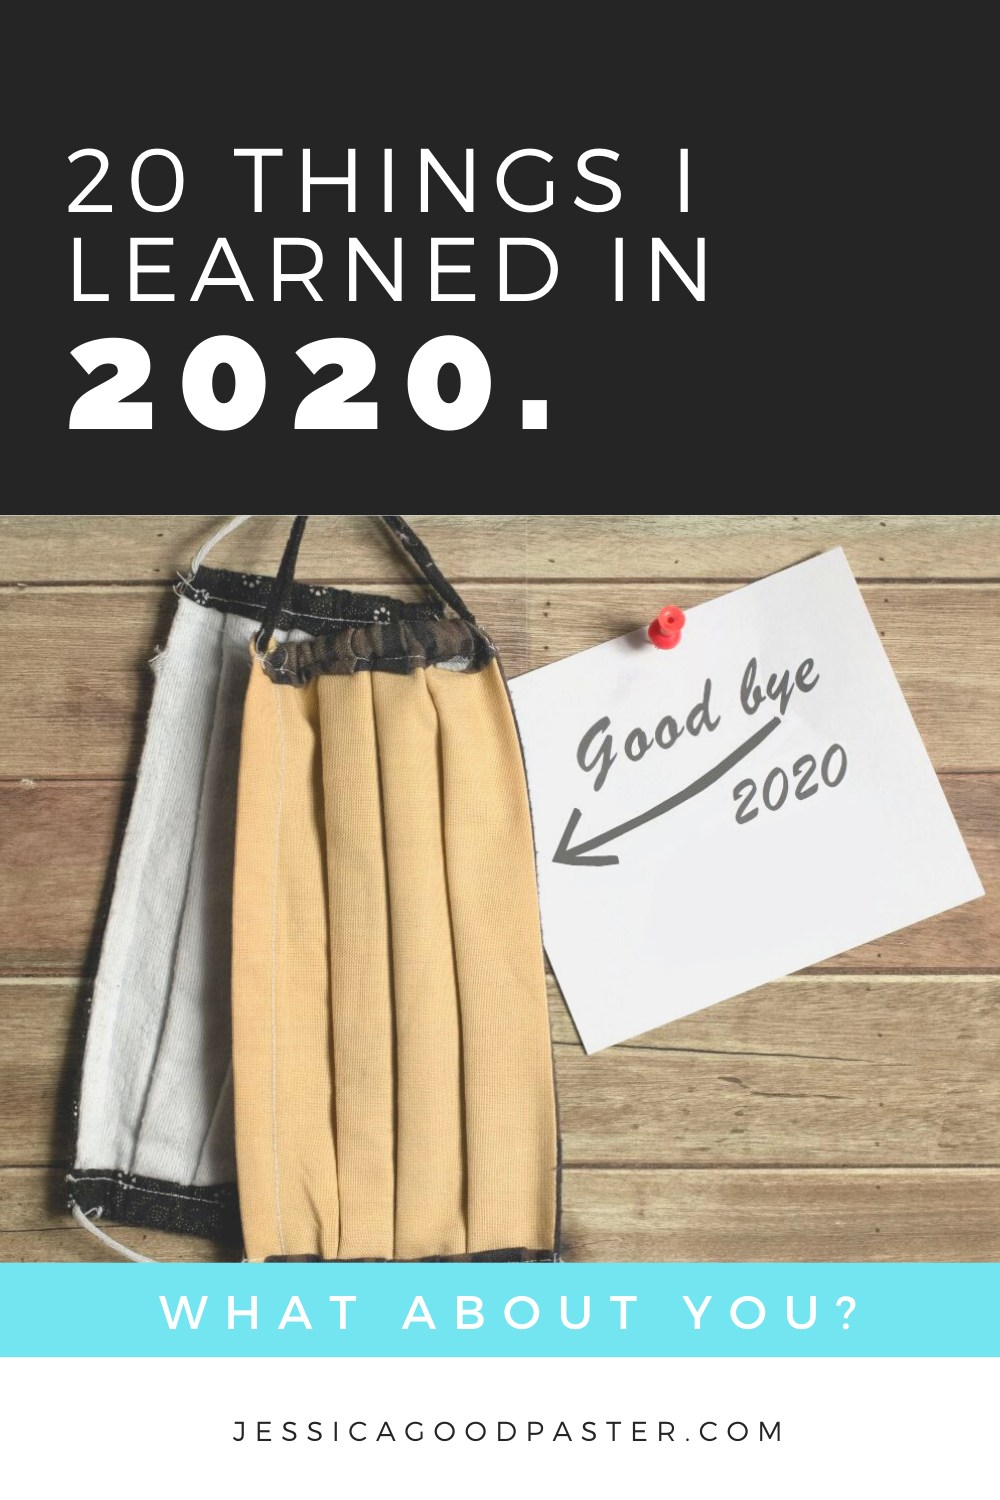 As we head into the New Year, it's important to look back and reflect on what we've learned in 2020 before attempting to set New Year's resolutions for 2021. See the lessons I've learned from this tumultous year and how you can grow from what we've all been through. #2020lessons #newyear #newyearsresolutions #goodbye2020 #newyearnewyou #reflections #learnandgrow